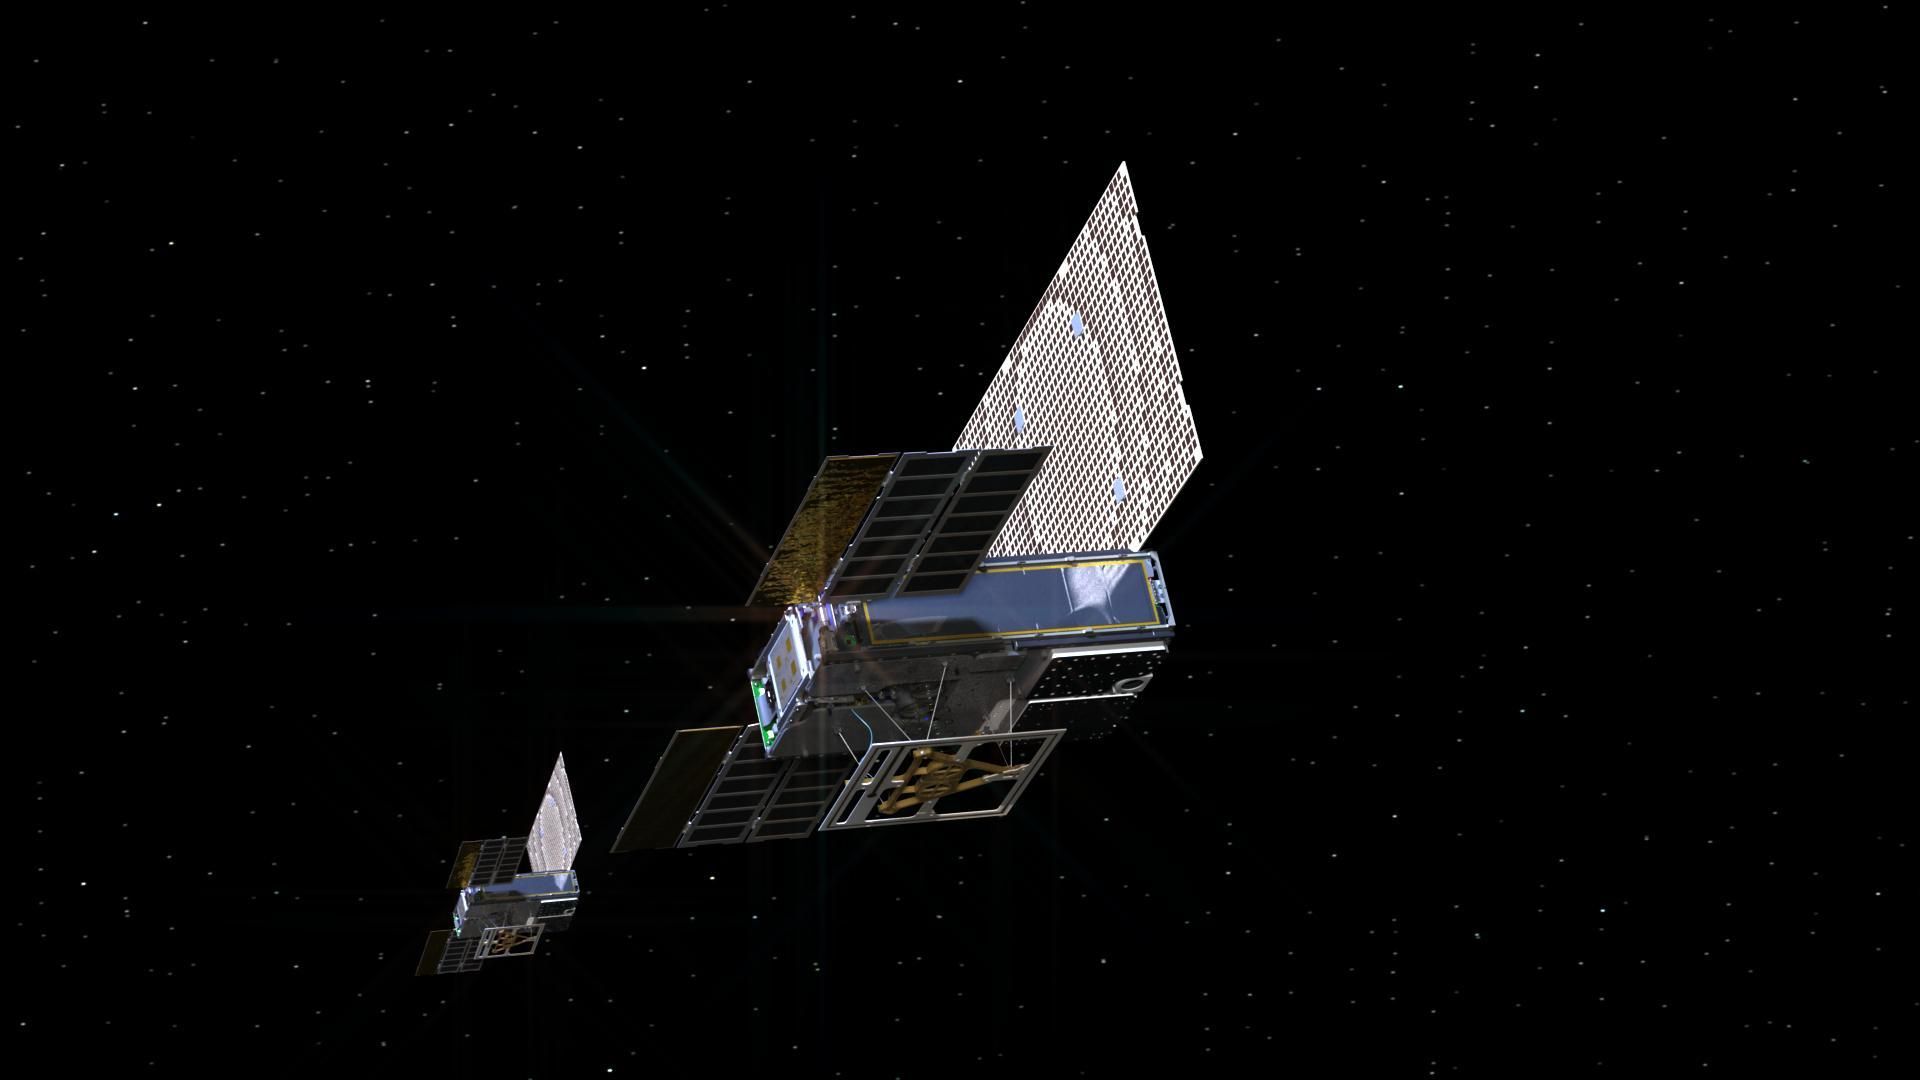 Twin small spacecraft in space.